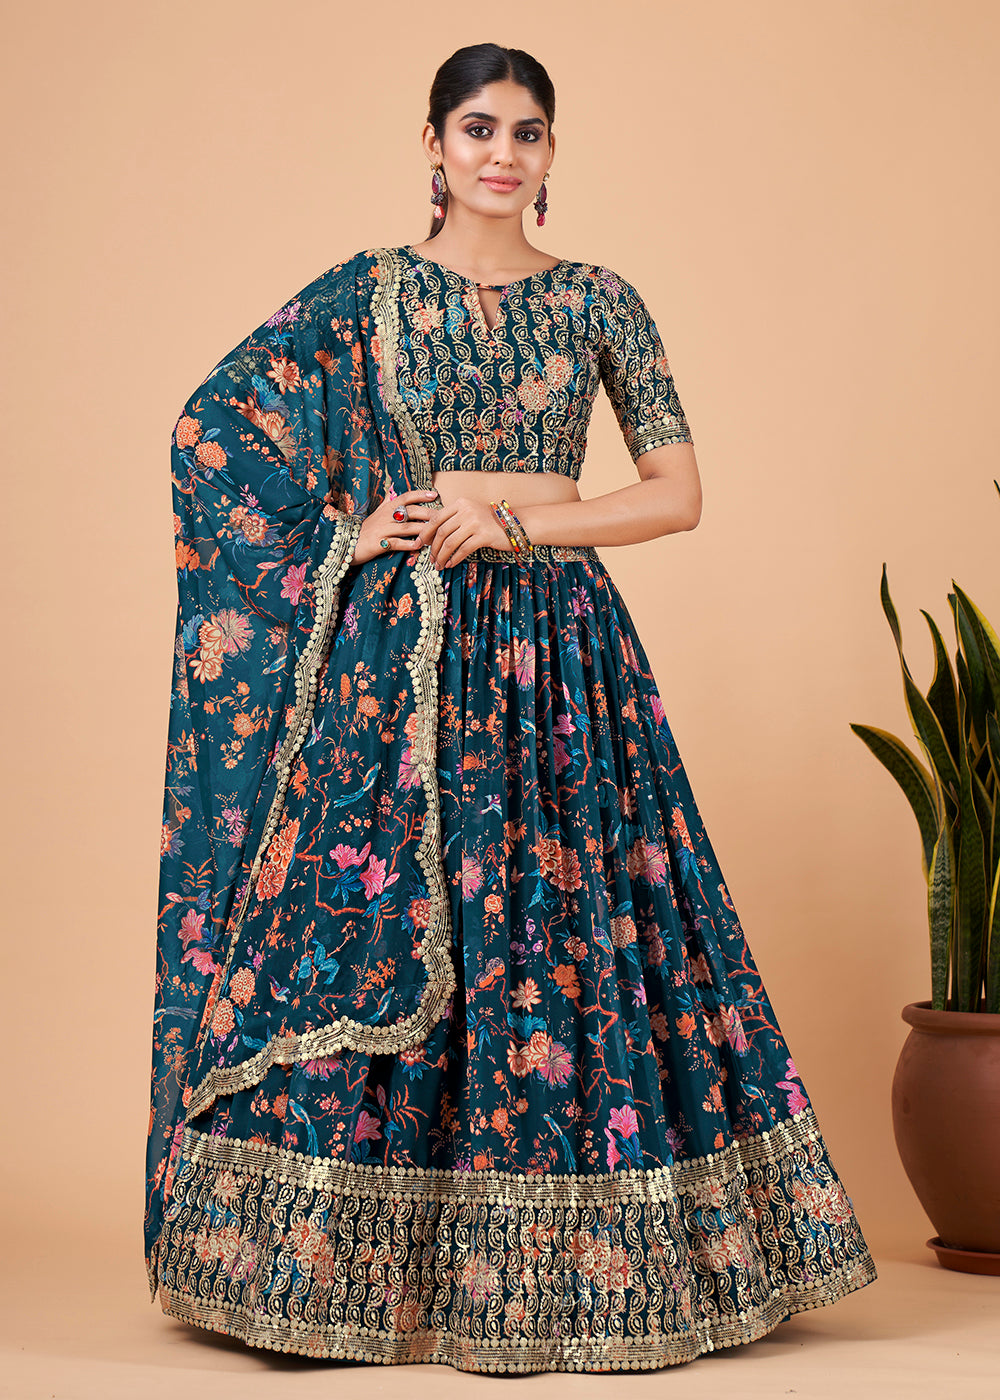 Buy Now Awesome Teal Blue Floral Printed Georgette Lehenga Choli Online in USA, UK, Canada & Worldwide at Empress Clothing